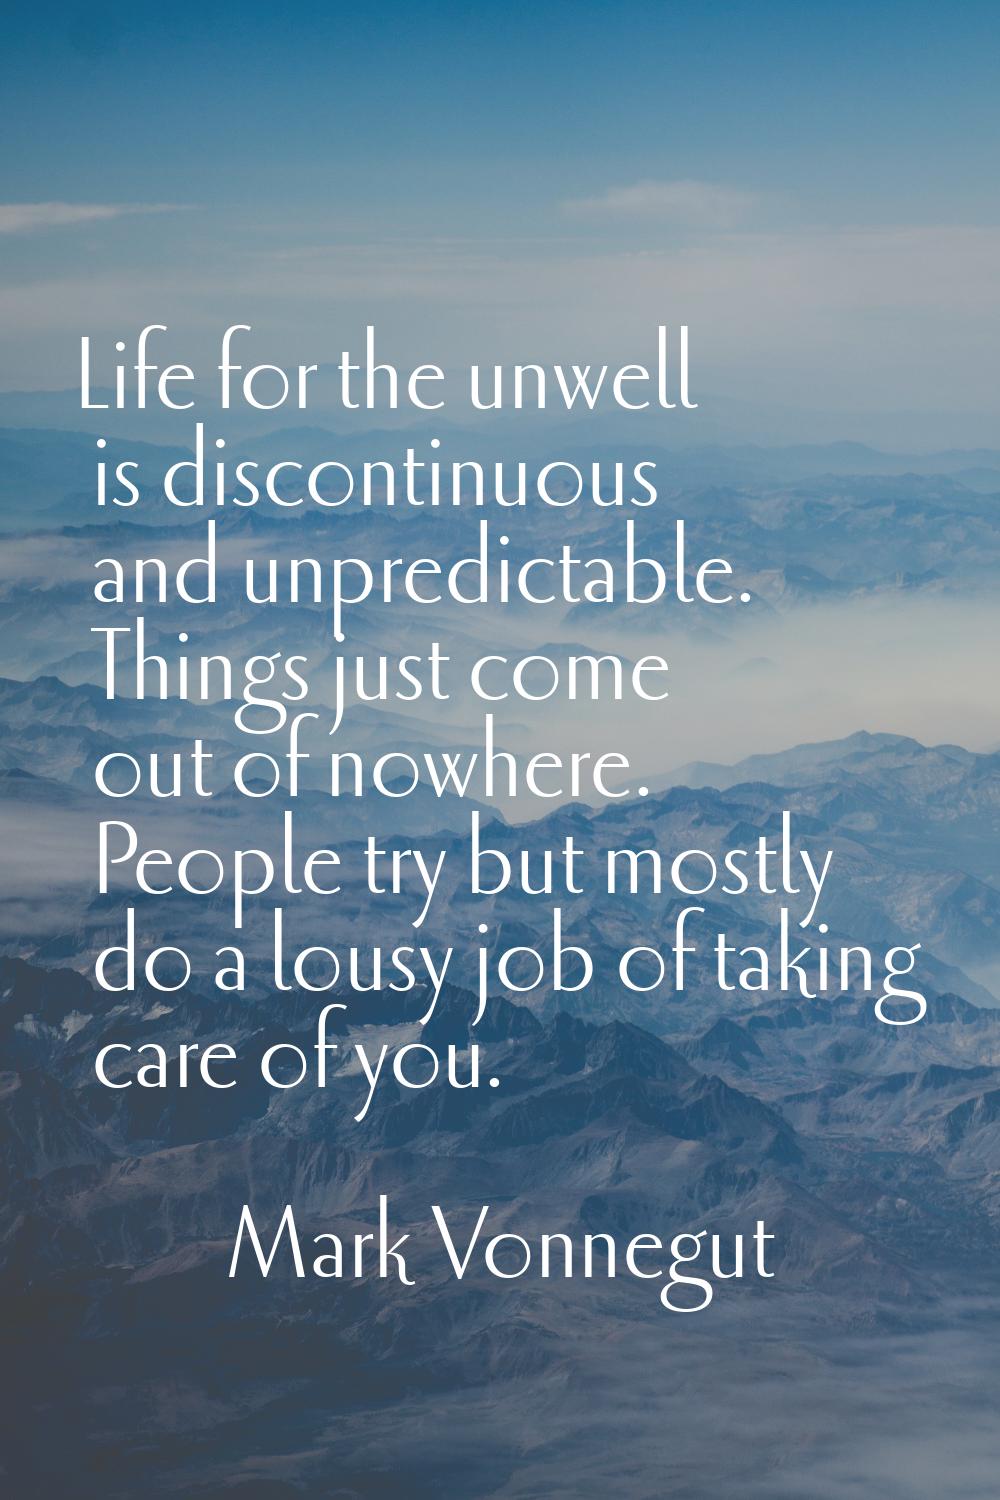 Life for the unwell is discontinuous and unpredictable. Things just come out of nowhere. People try